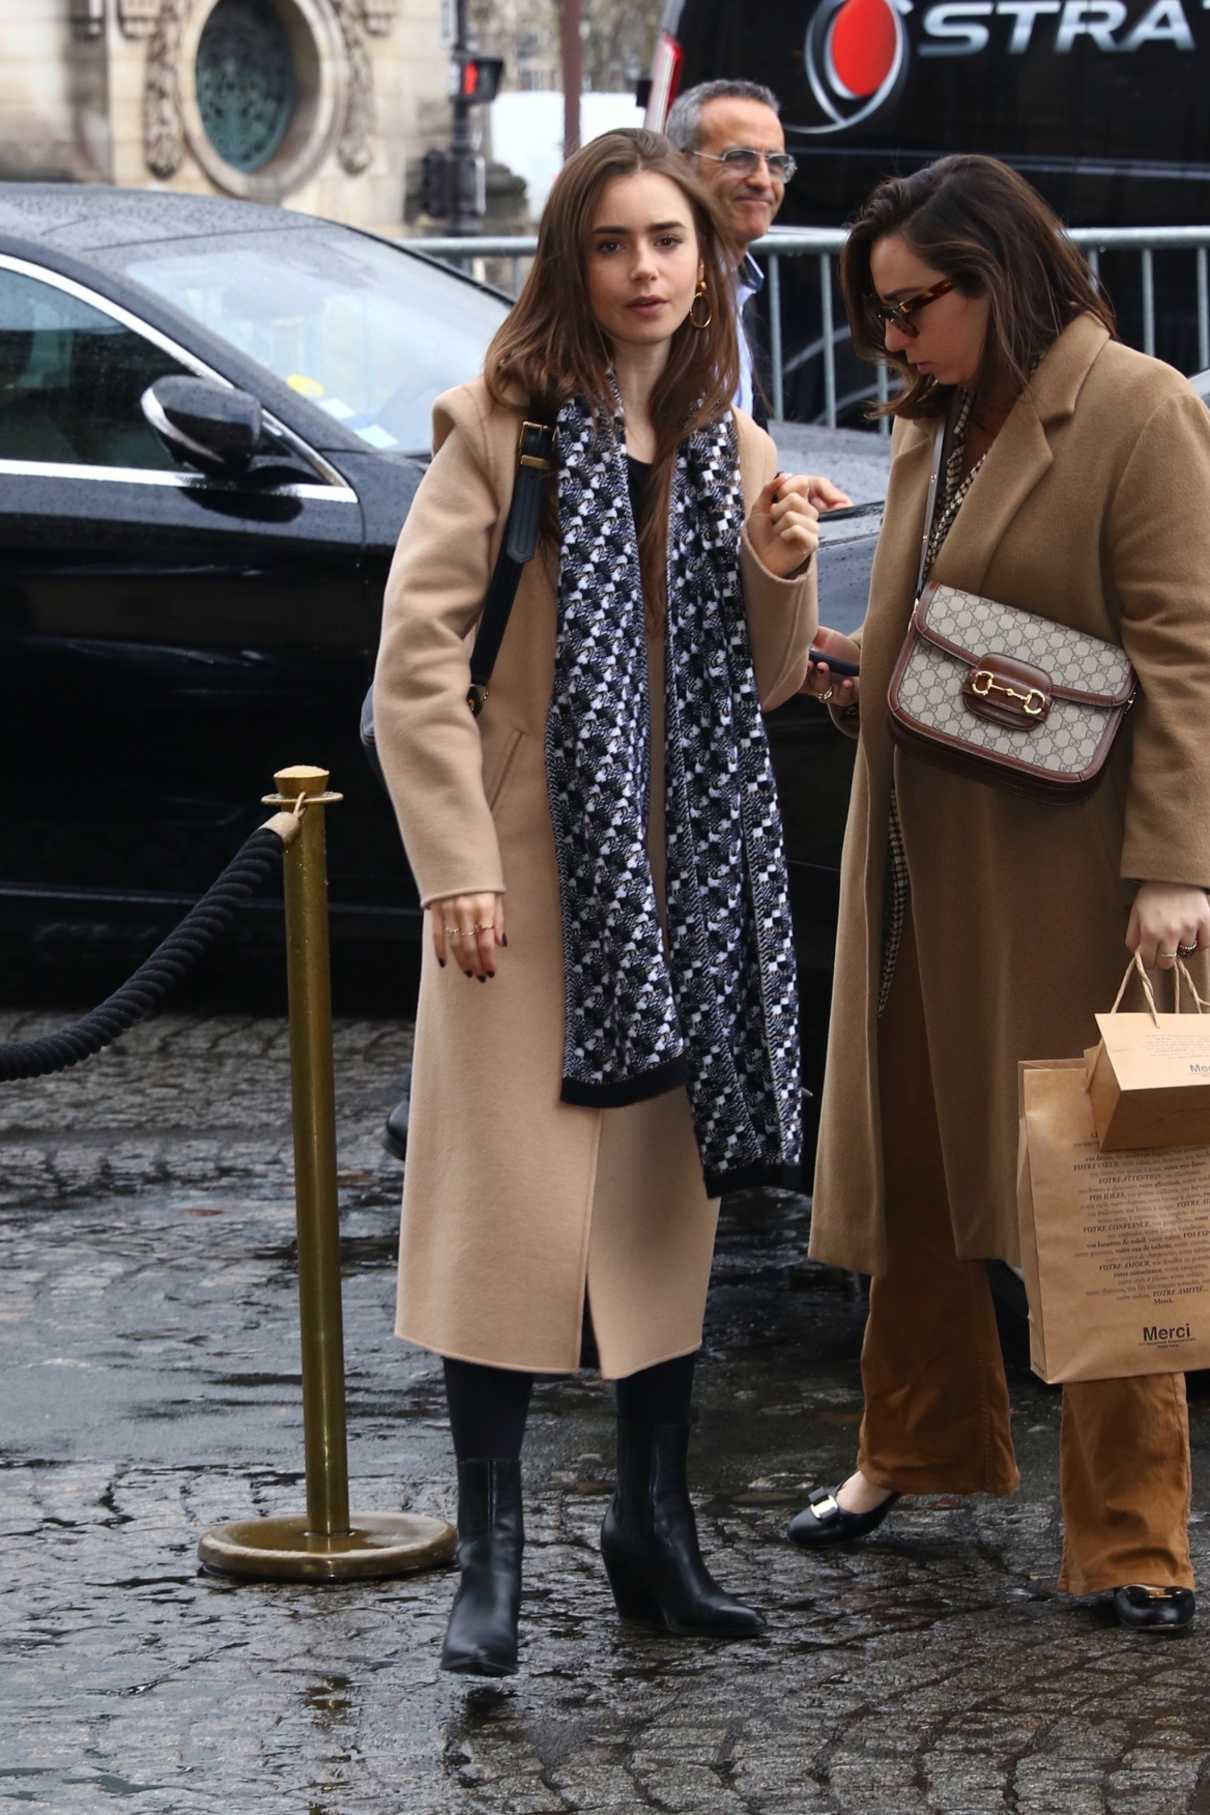 Lily Collins in a Tan Coat